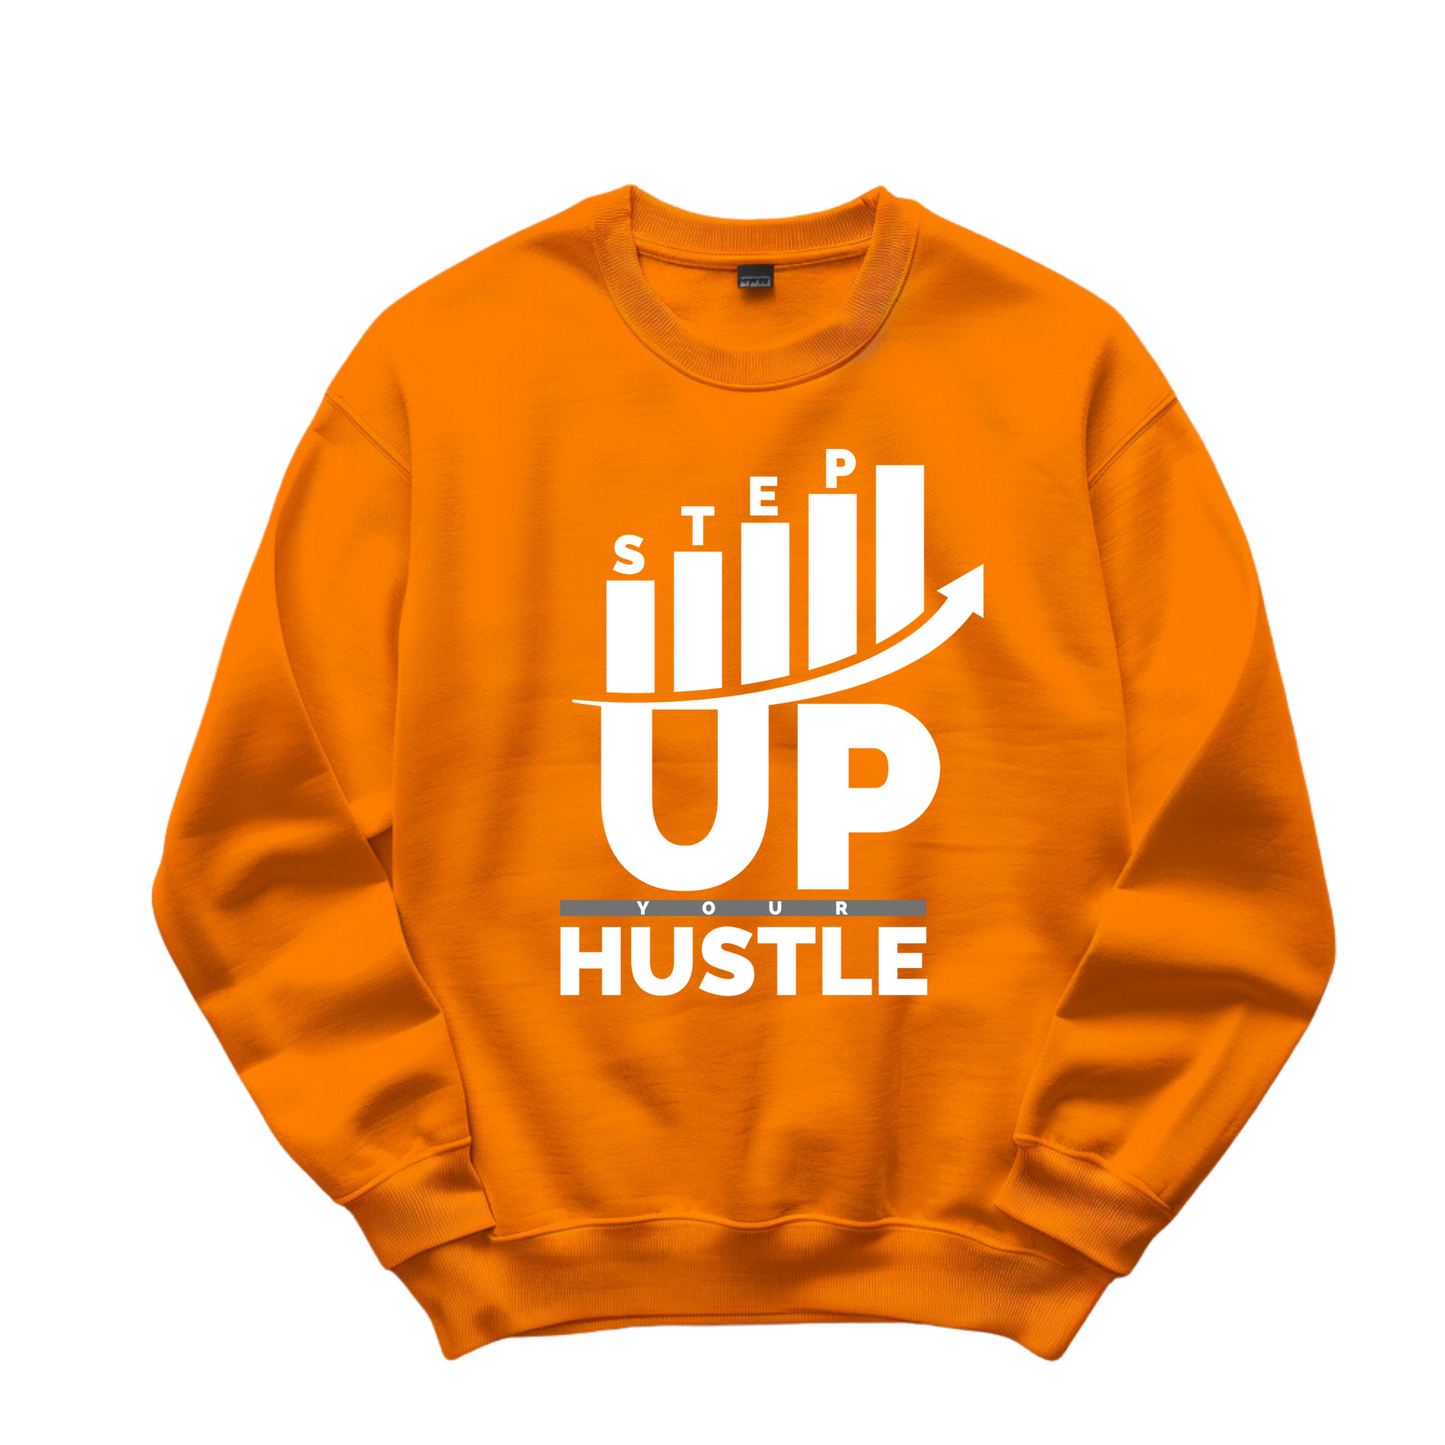 Step Up Your Hustle - Sweat Shirt